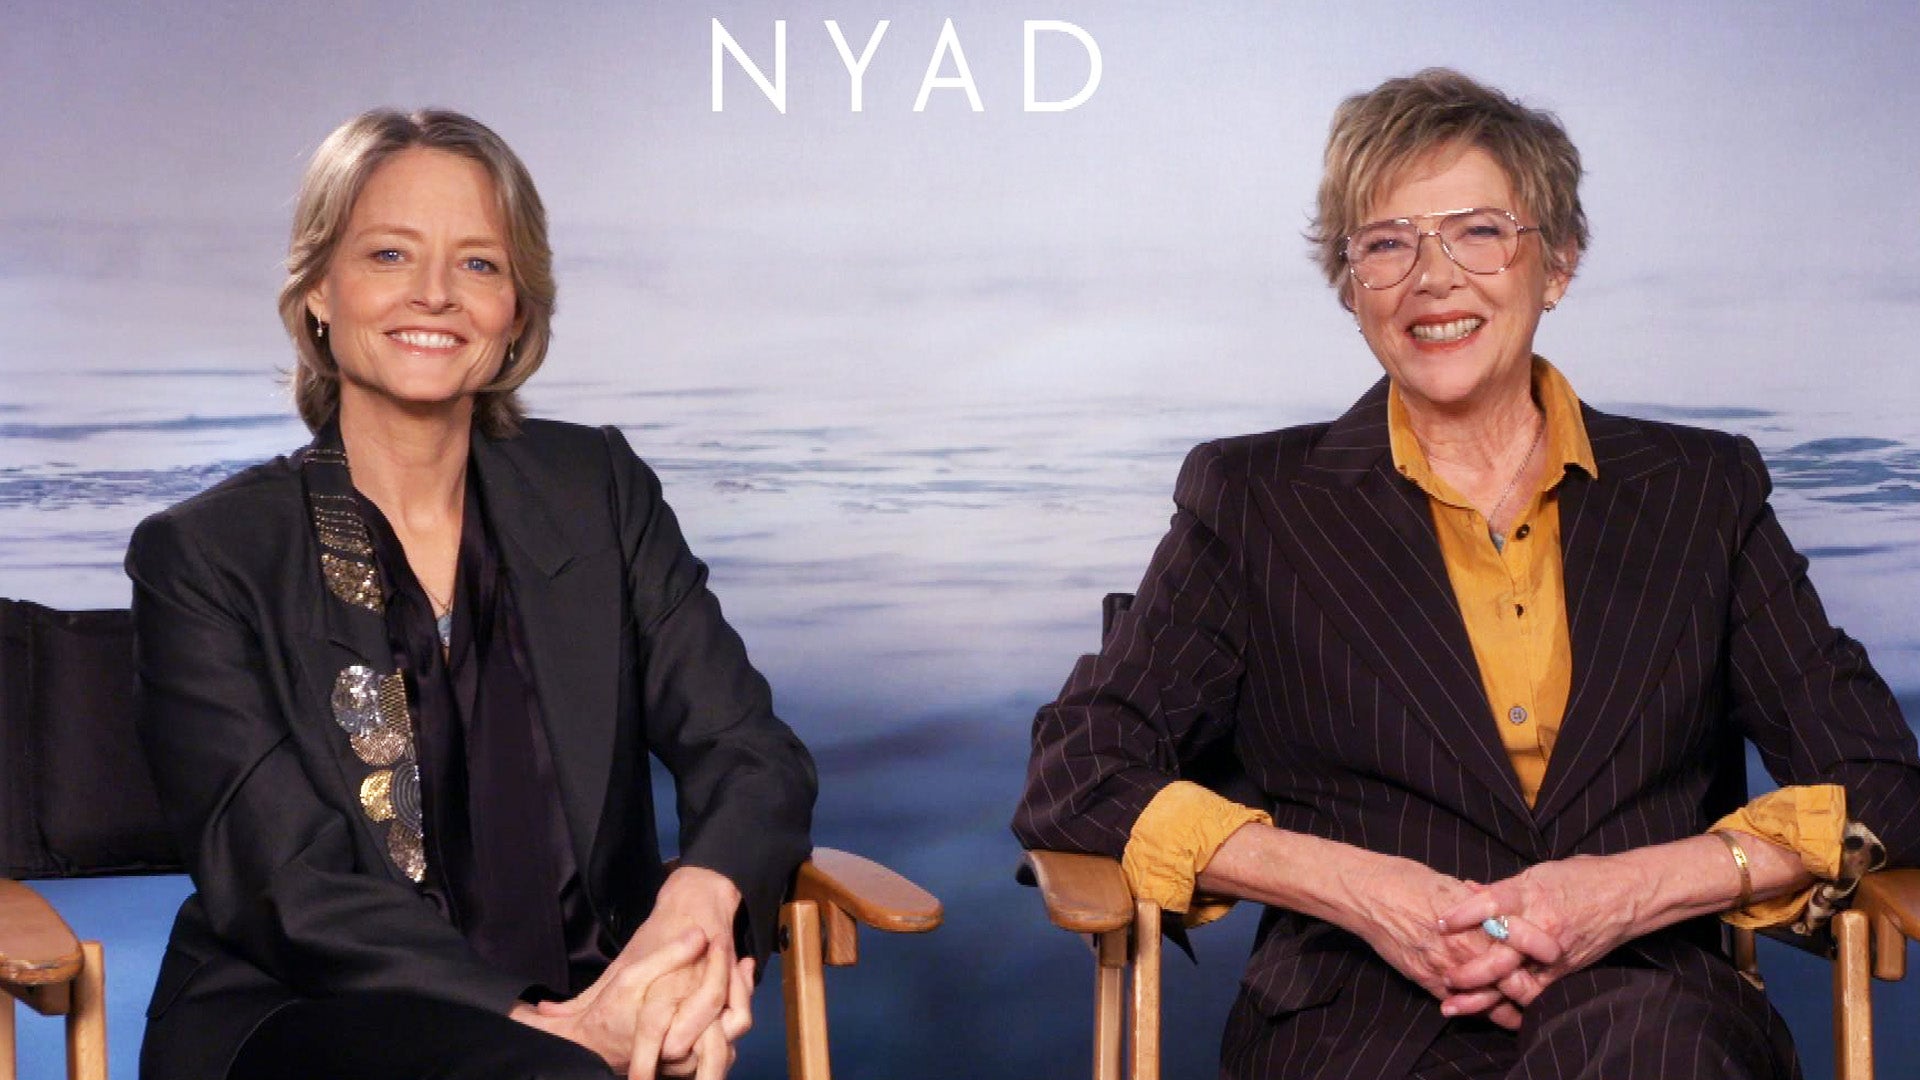 Why Pals Jodie Foster and Annette Bening Never Worked Together Before 'NYAD' (Exclusive)